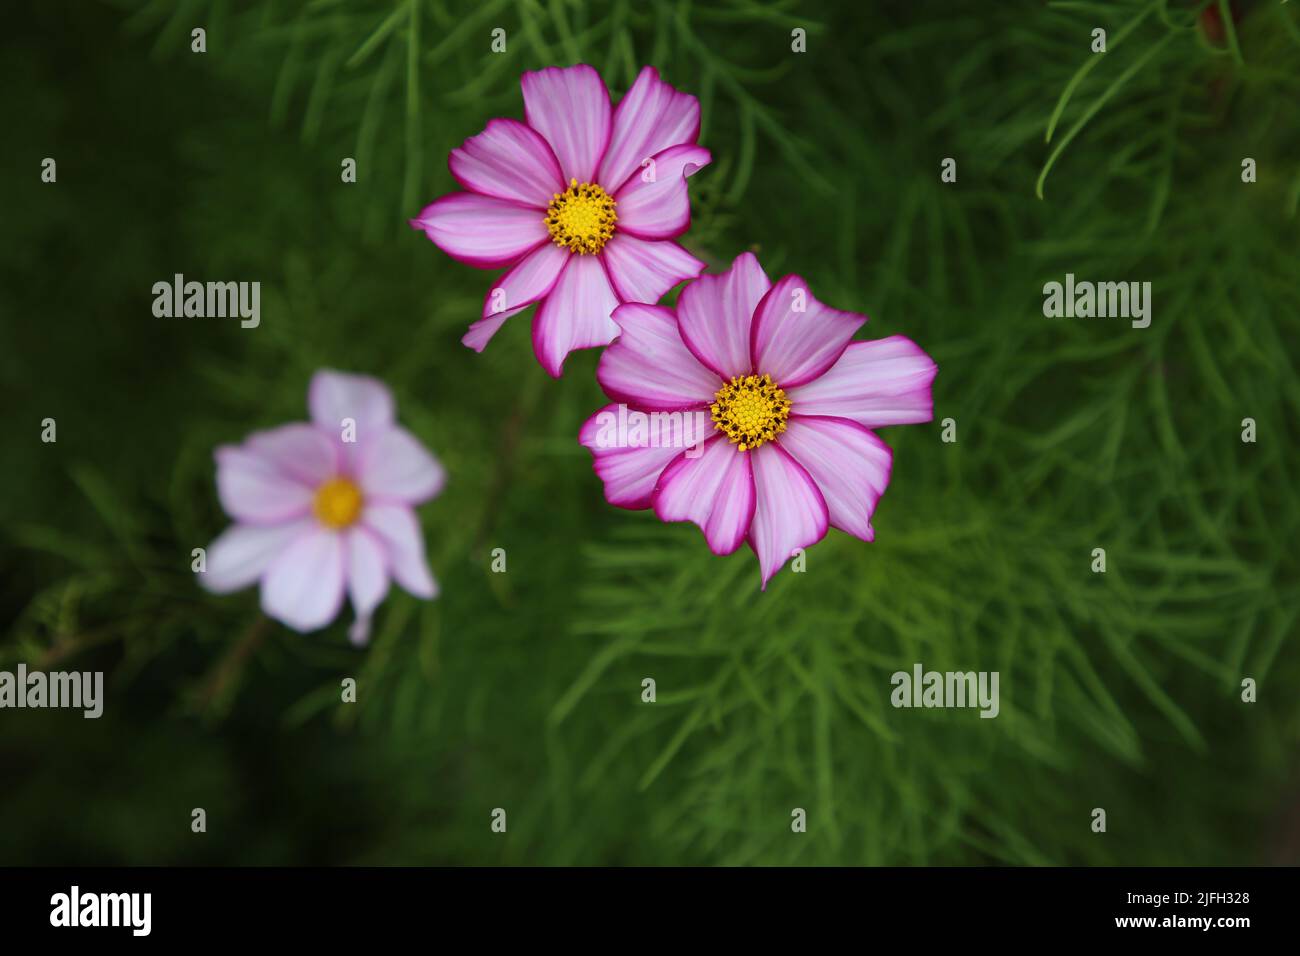 Bright pink cosmos aka aster flowers (fin: kosmos kukka) in a closeup image with some greens in the background. Beautiful spring flowers photographed. Stock Photo